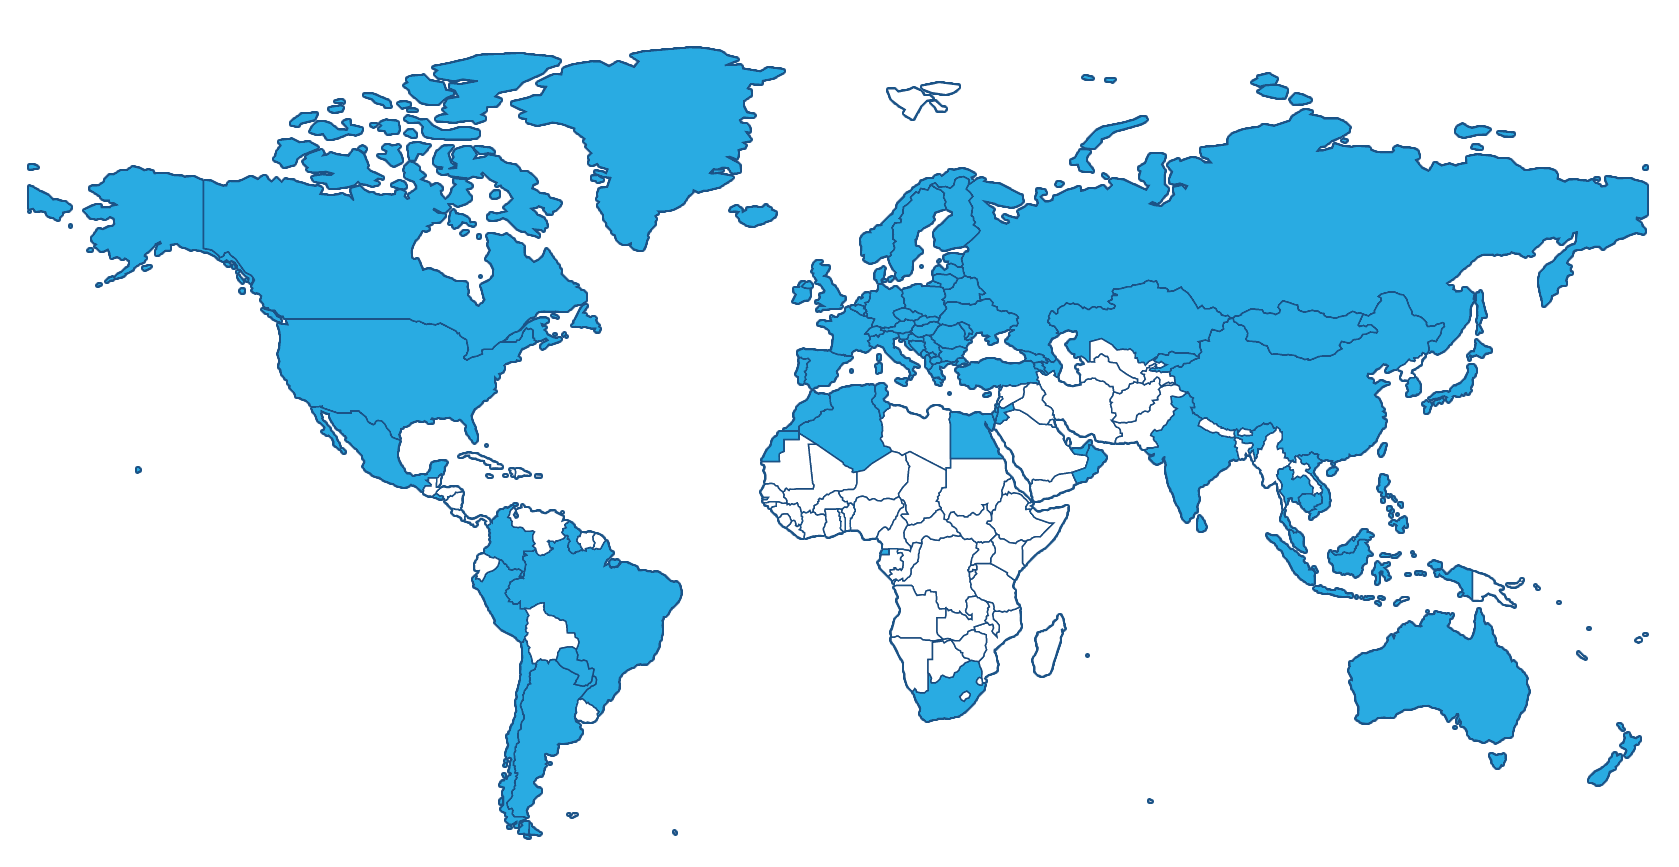 Coverage Map of all Countries and Regions with 1NCE IoT Mobile Network coverage.